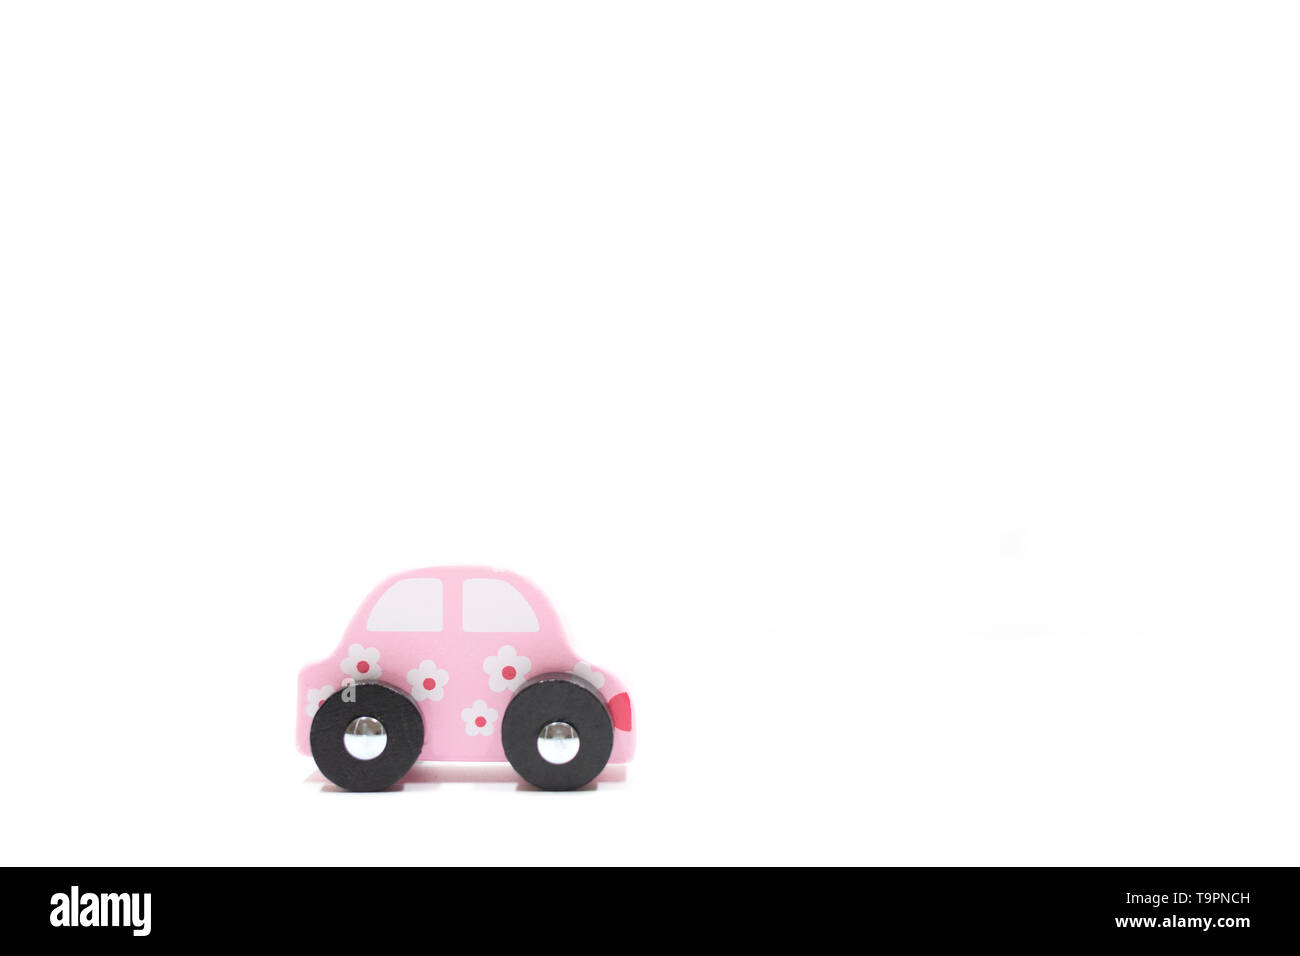 cars on white background. learn how to drive. get the car license. summer purpose learn rules of thumb. car model Stock Photo